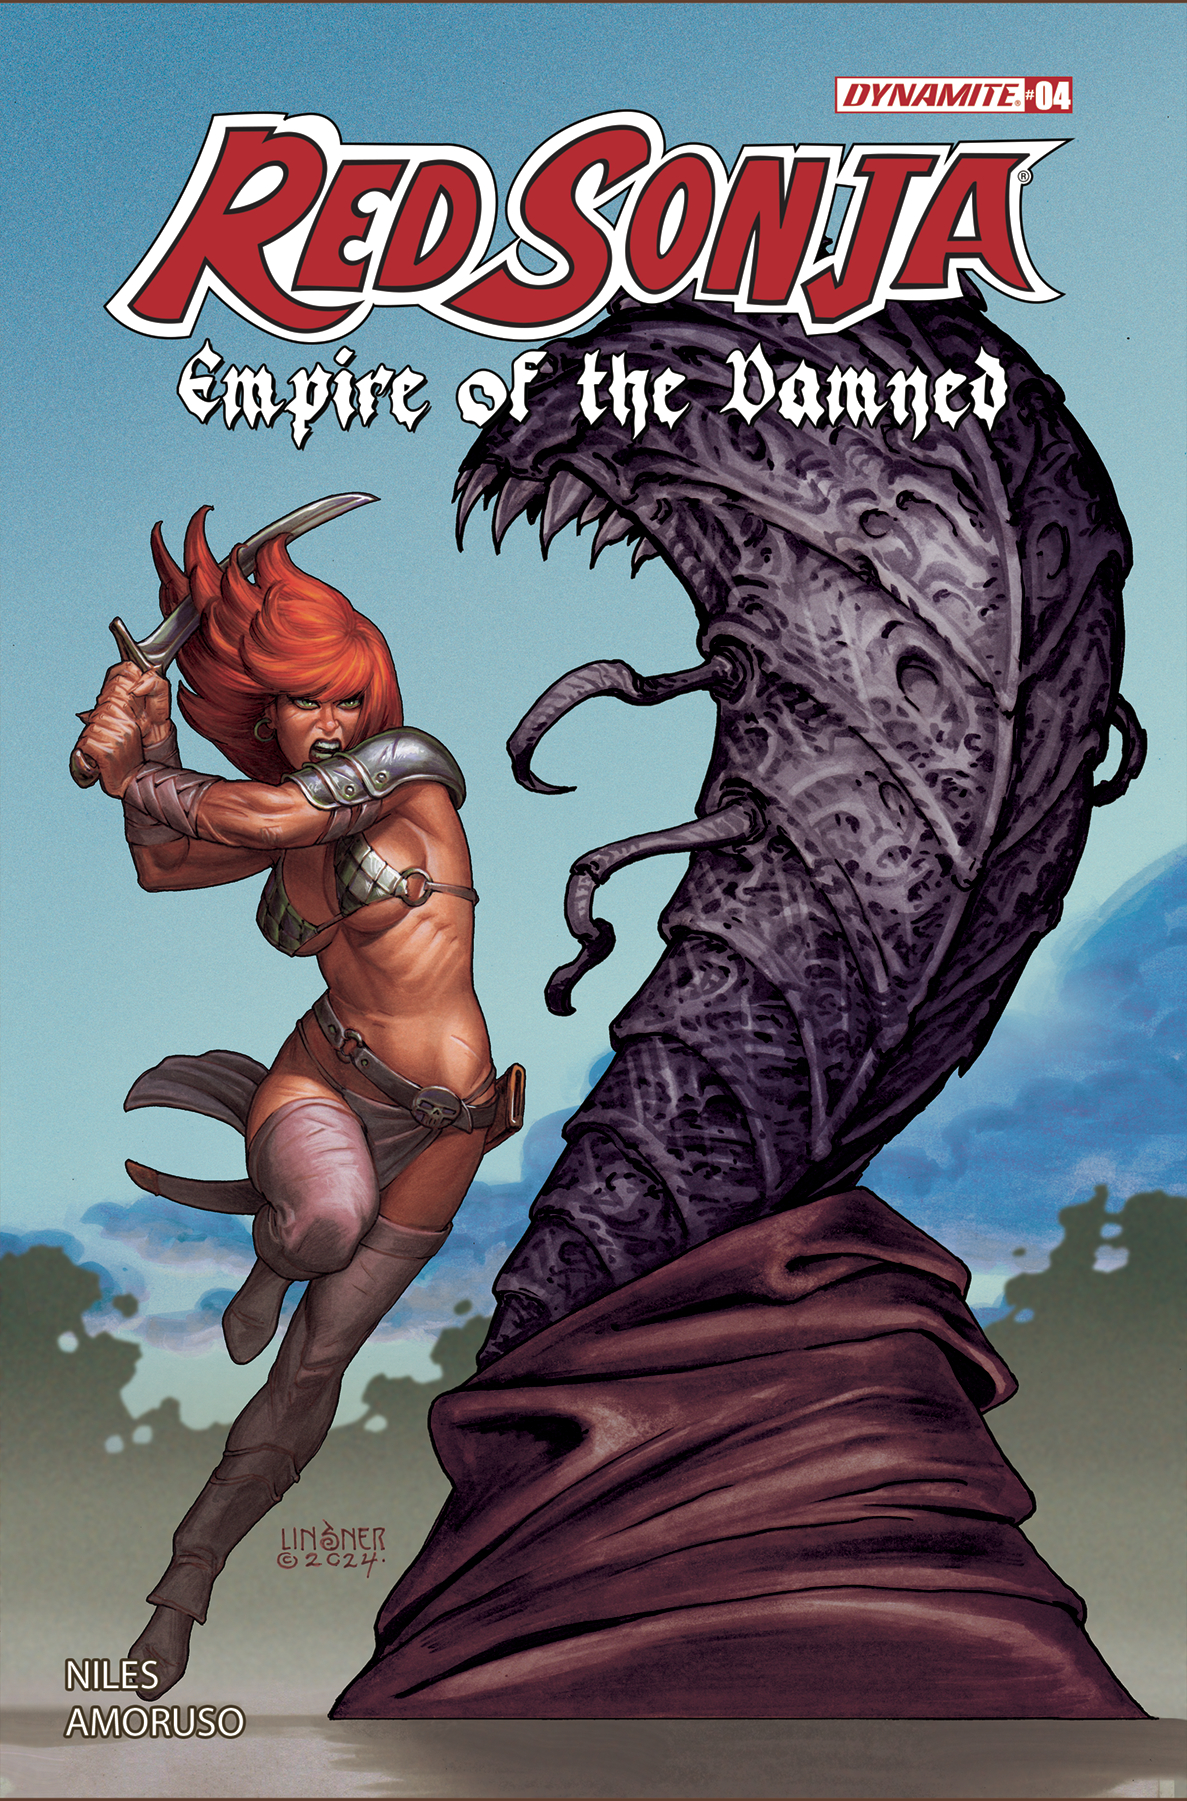 Red Sonja Empire of the Damned #4 Cover B Linsner